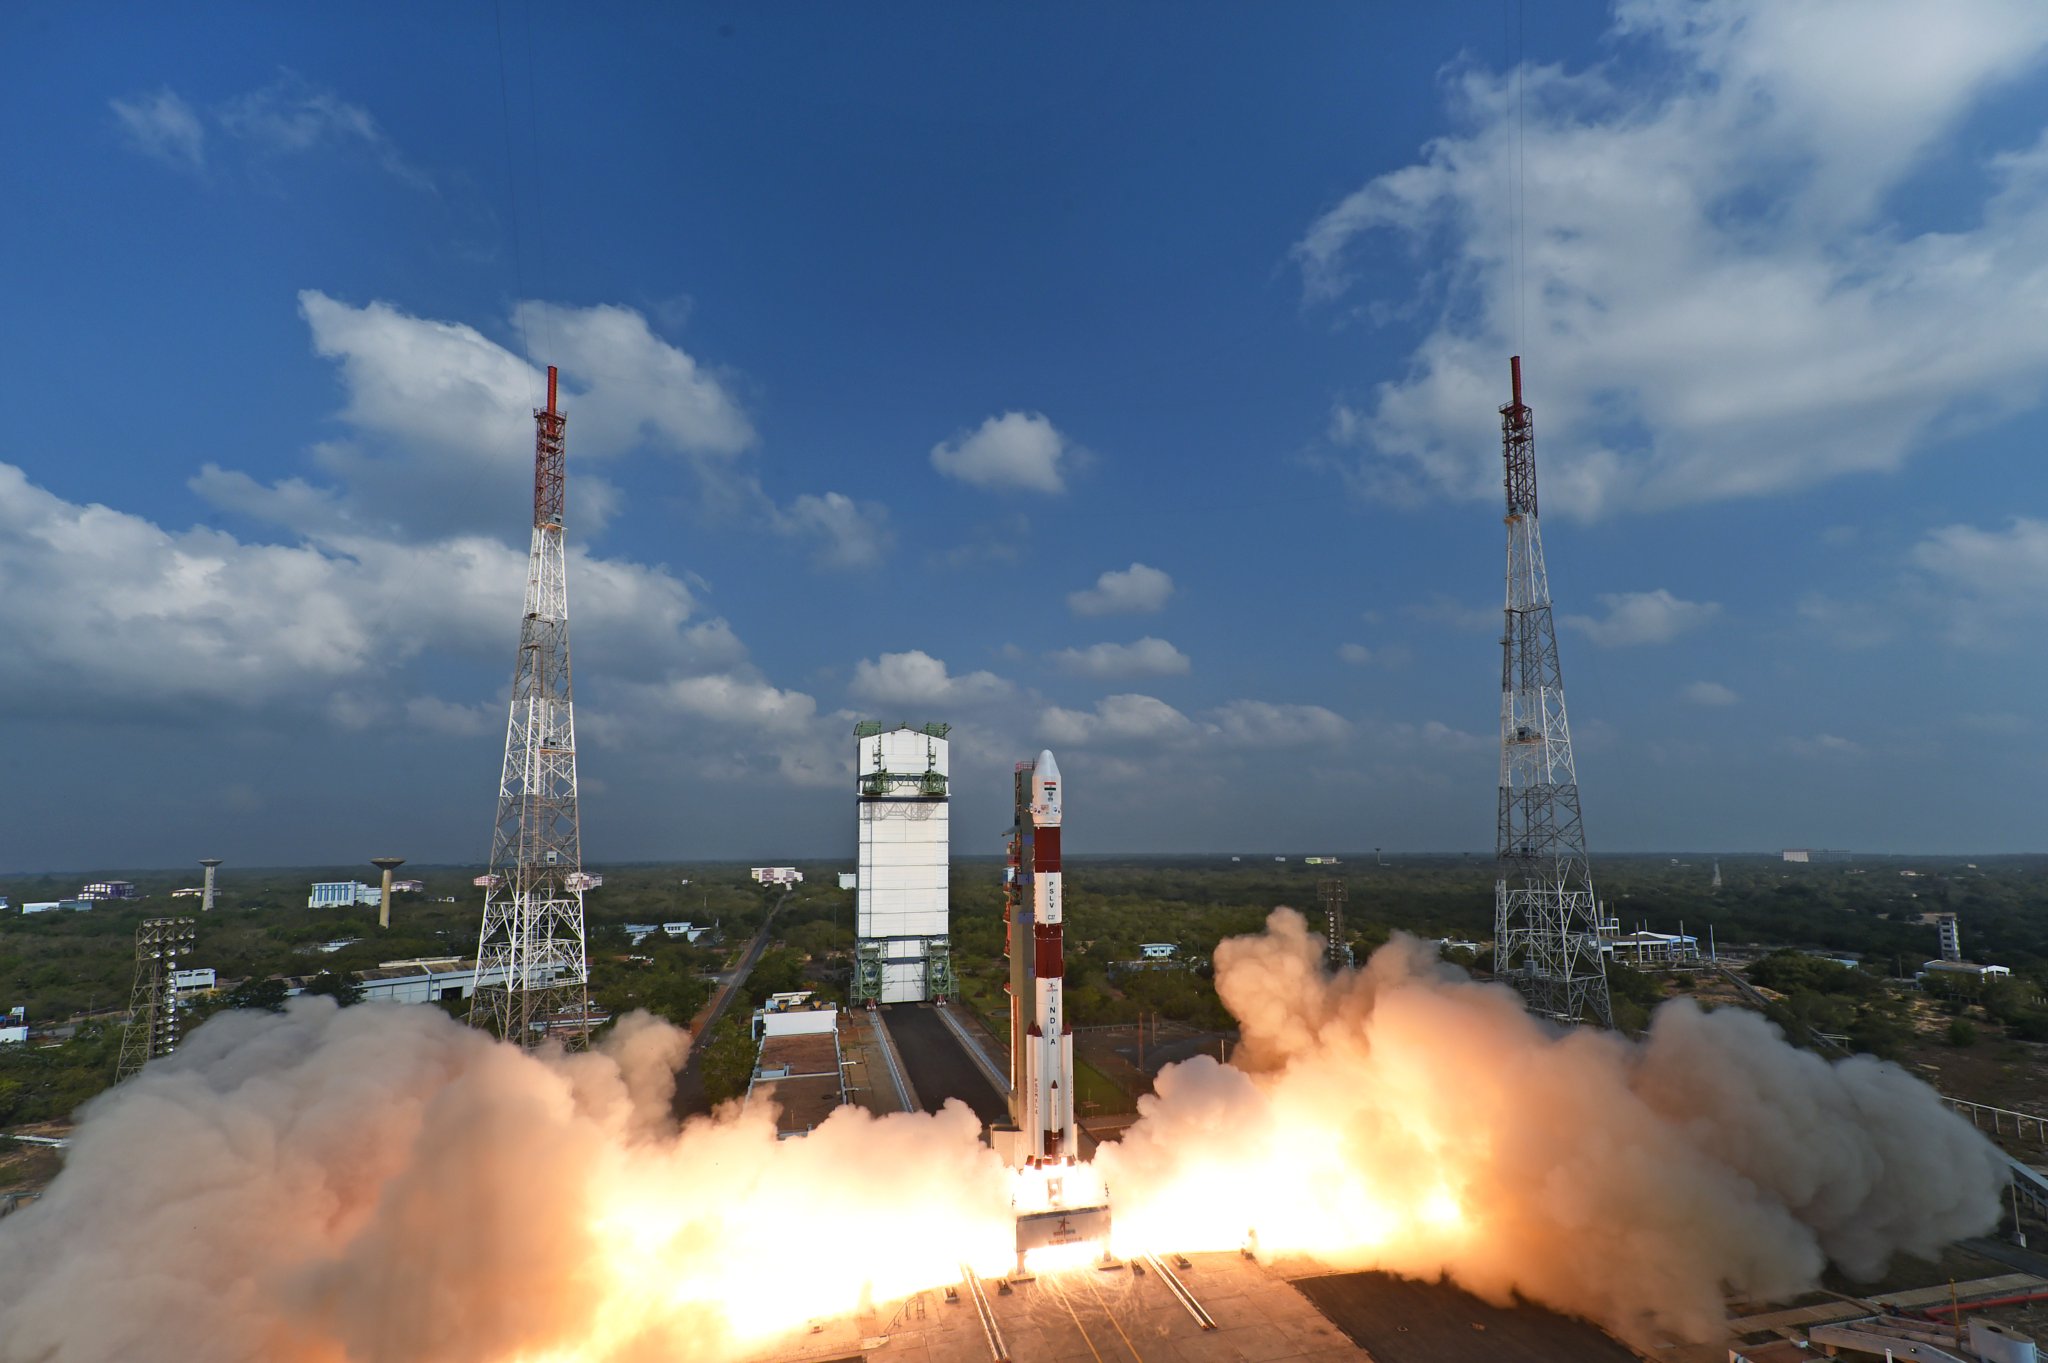 World Record for ISRO and India - PSLV-C37 Successfully Launches 104 Satellites in a Single Flight